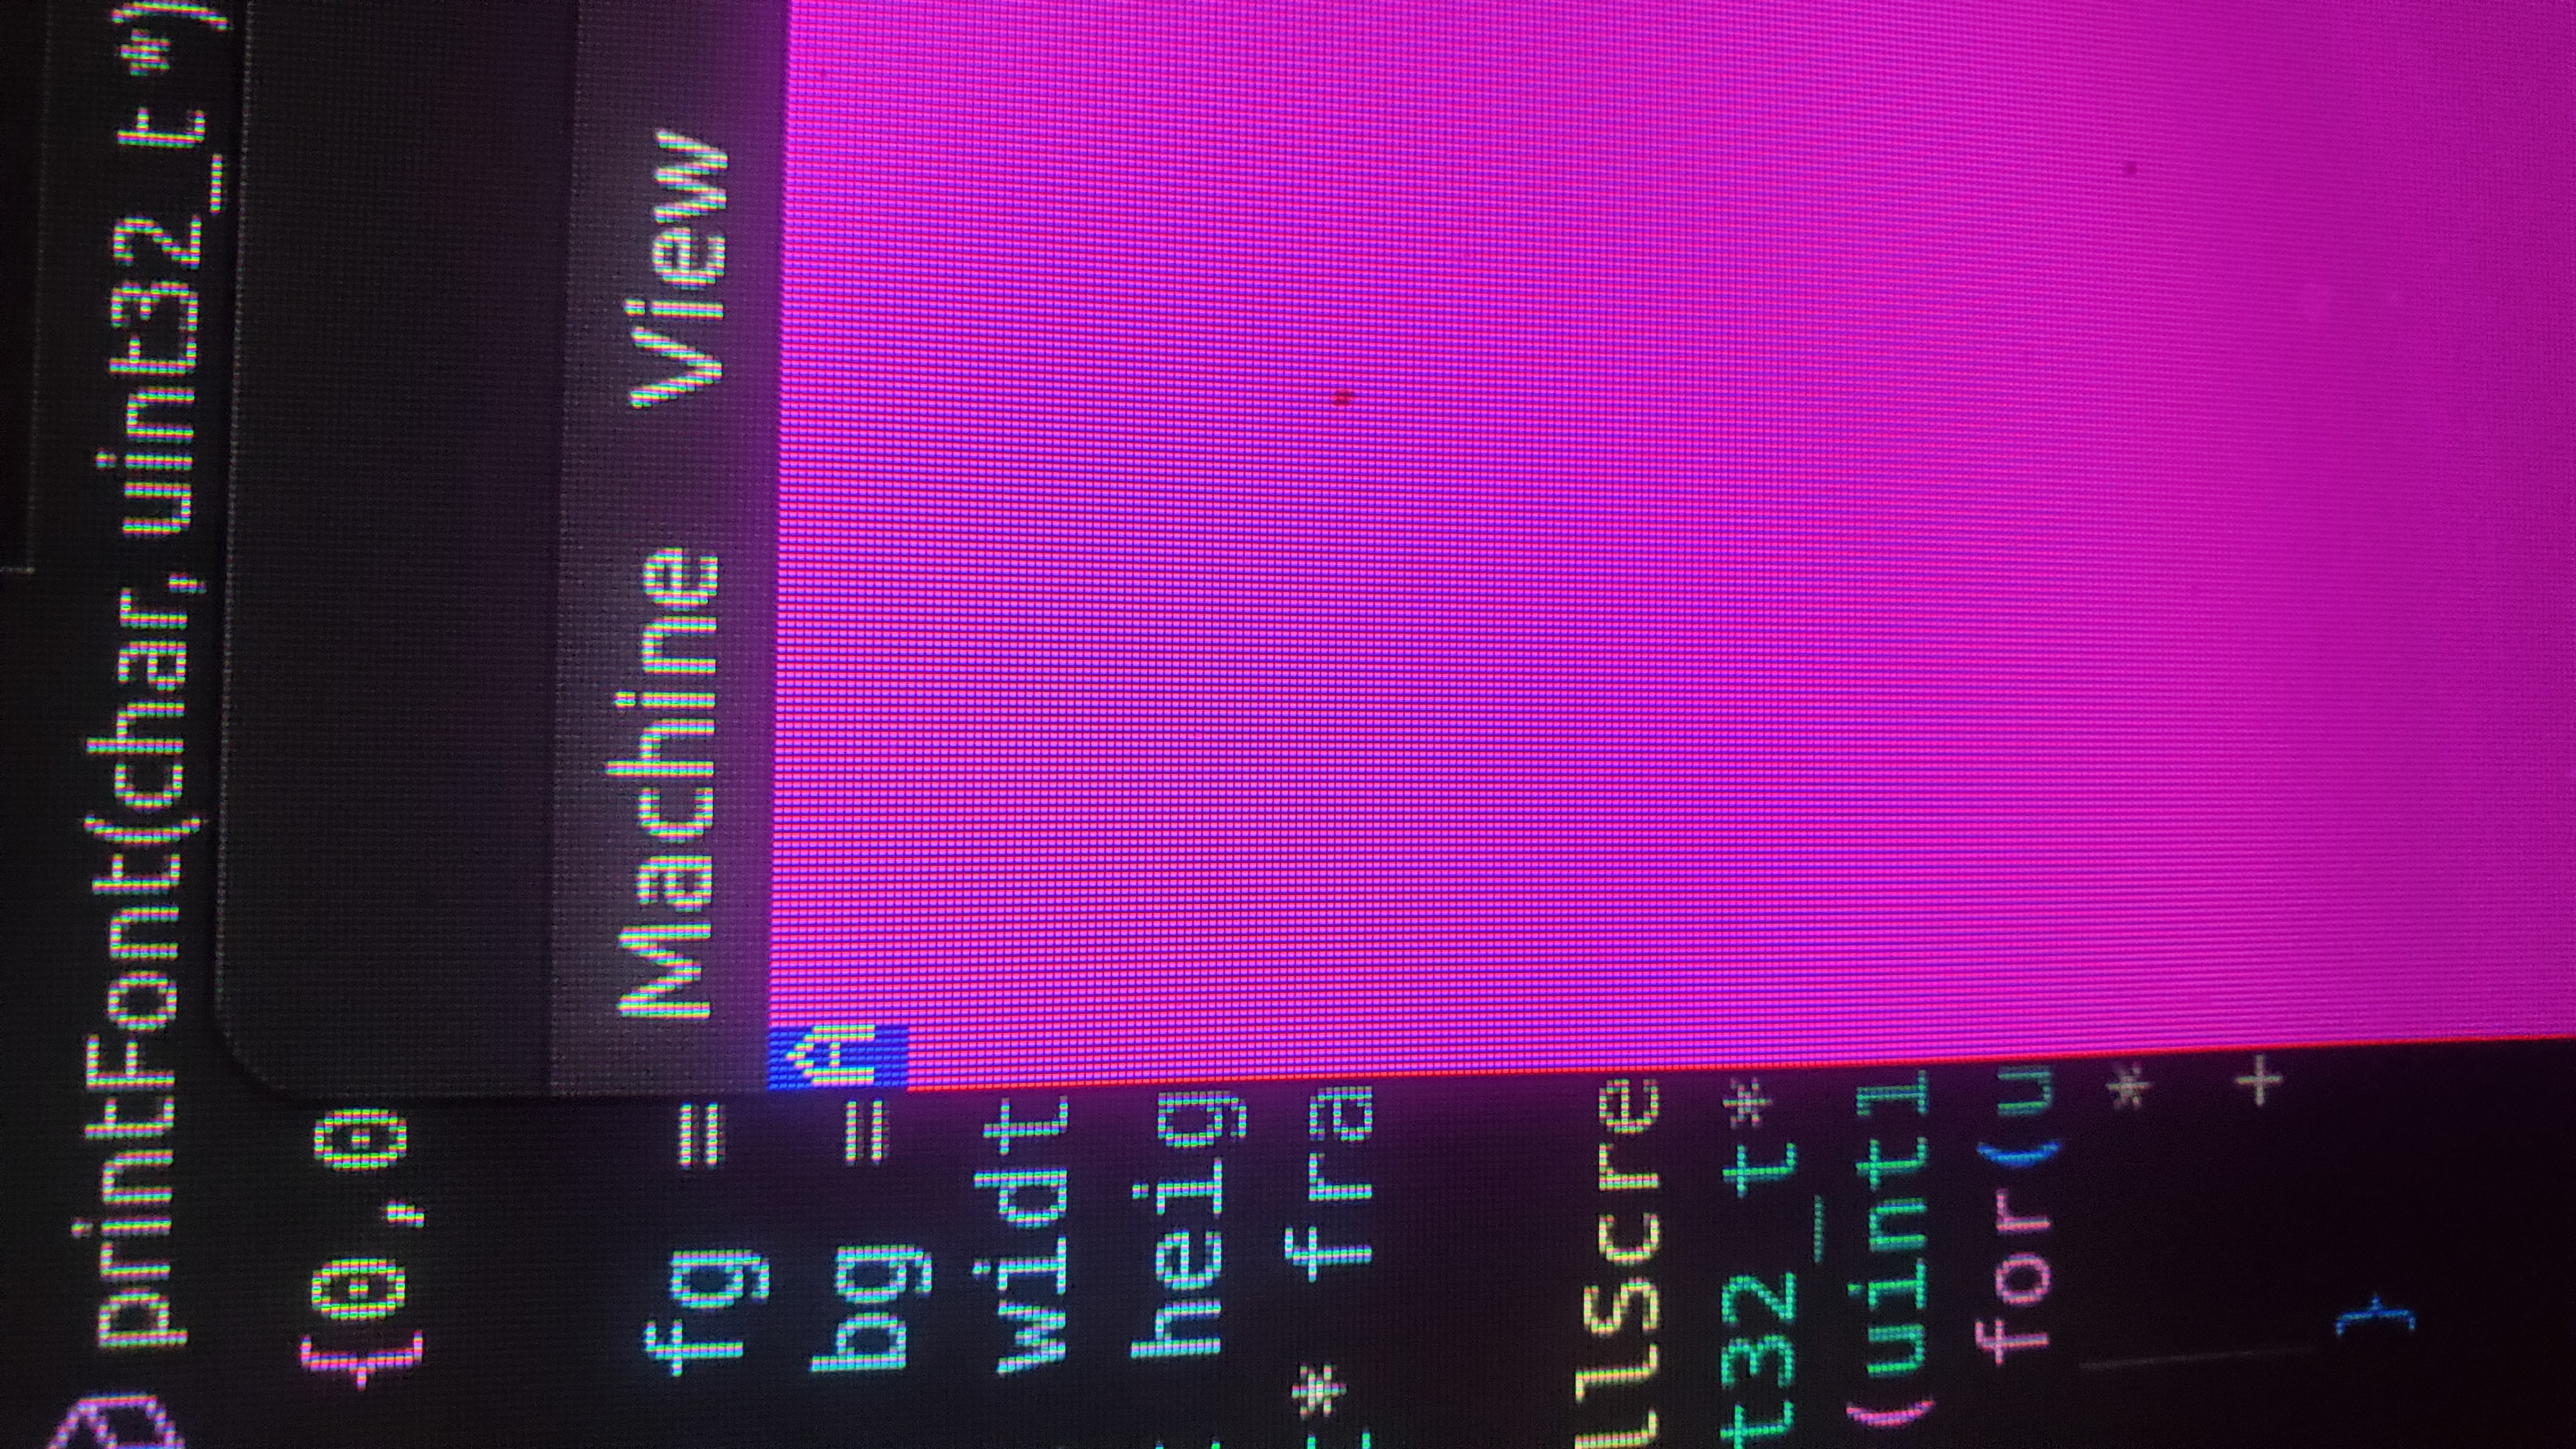 A picture of a computer screen showing a white capital A on a blue background, surrounded by magenta.